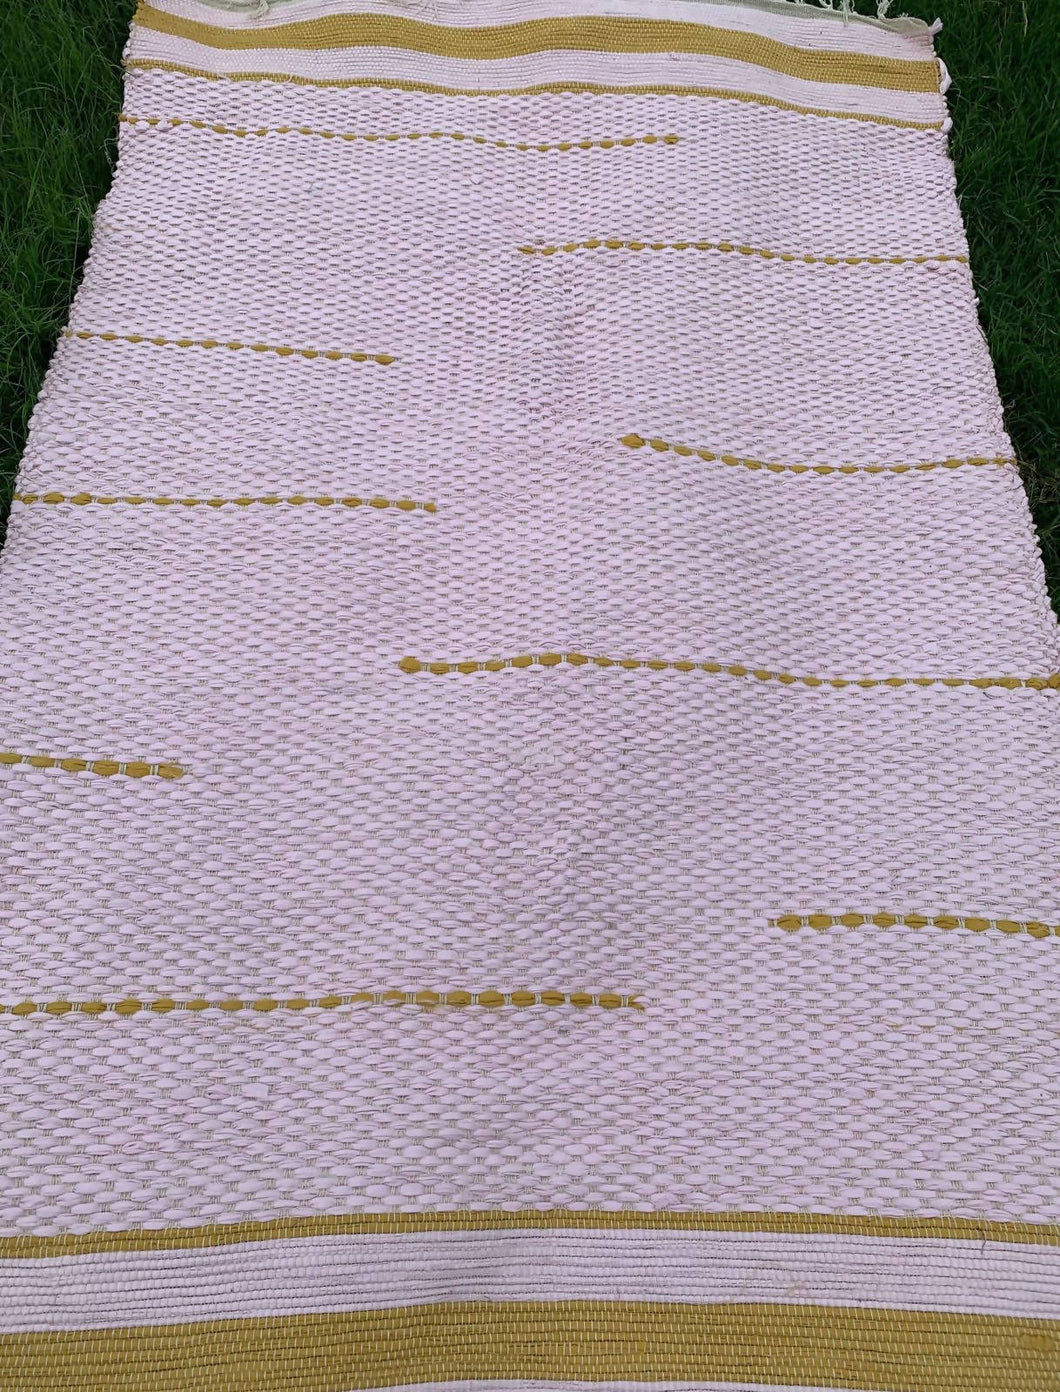 Yellow Accents Recycled, Handwoven Rug - 4’x7’